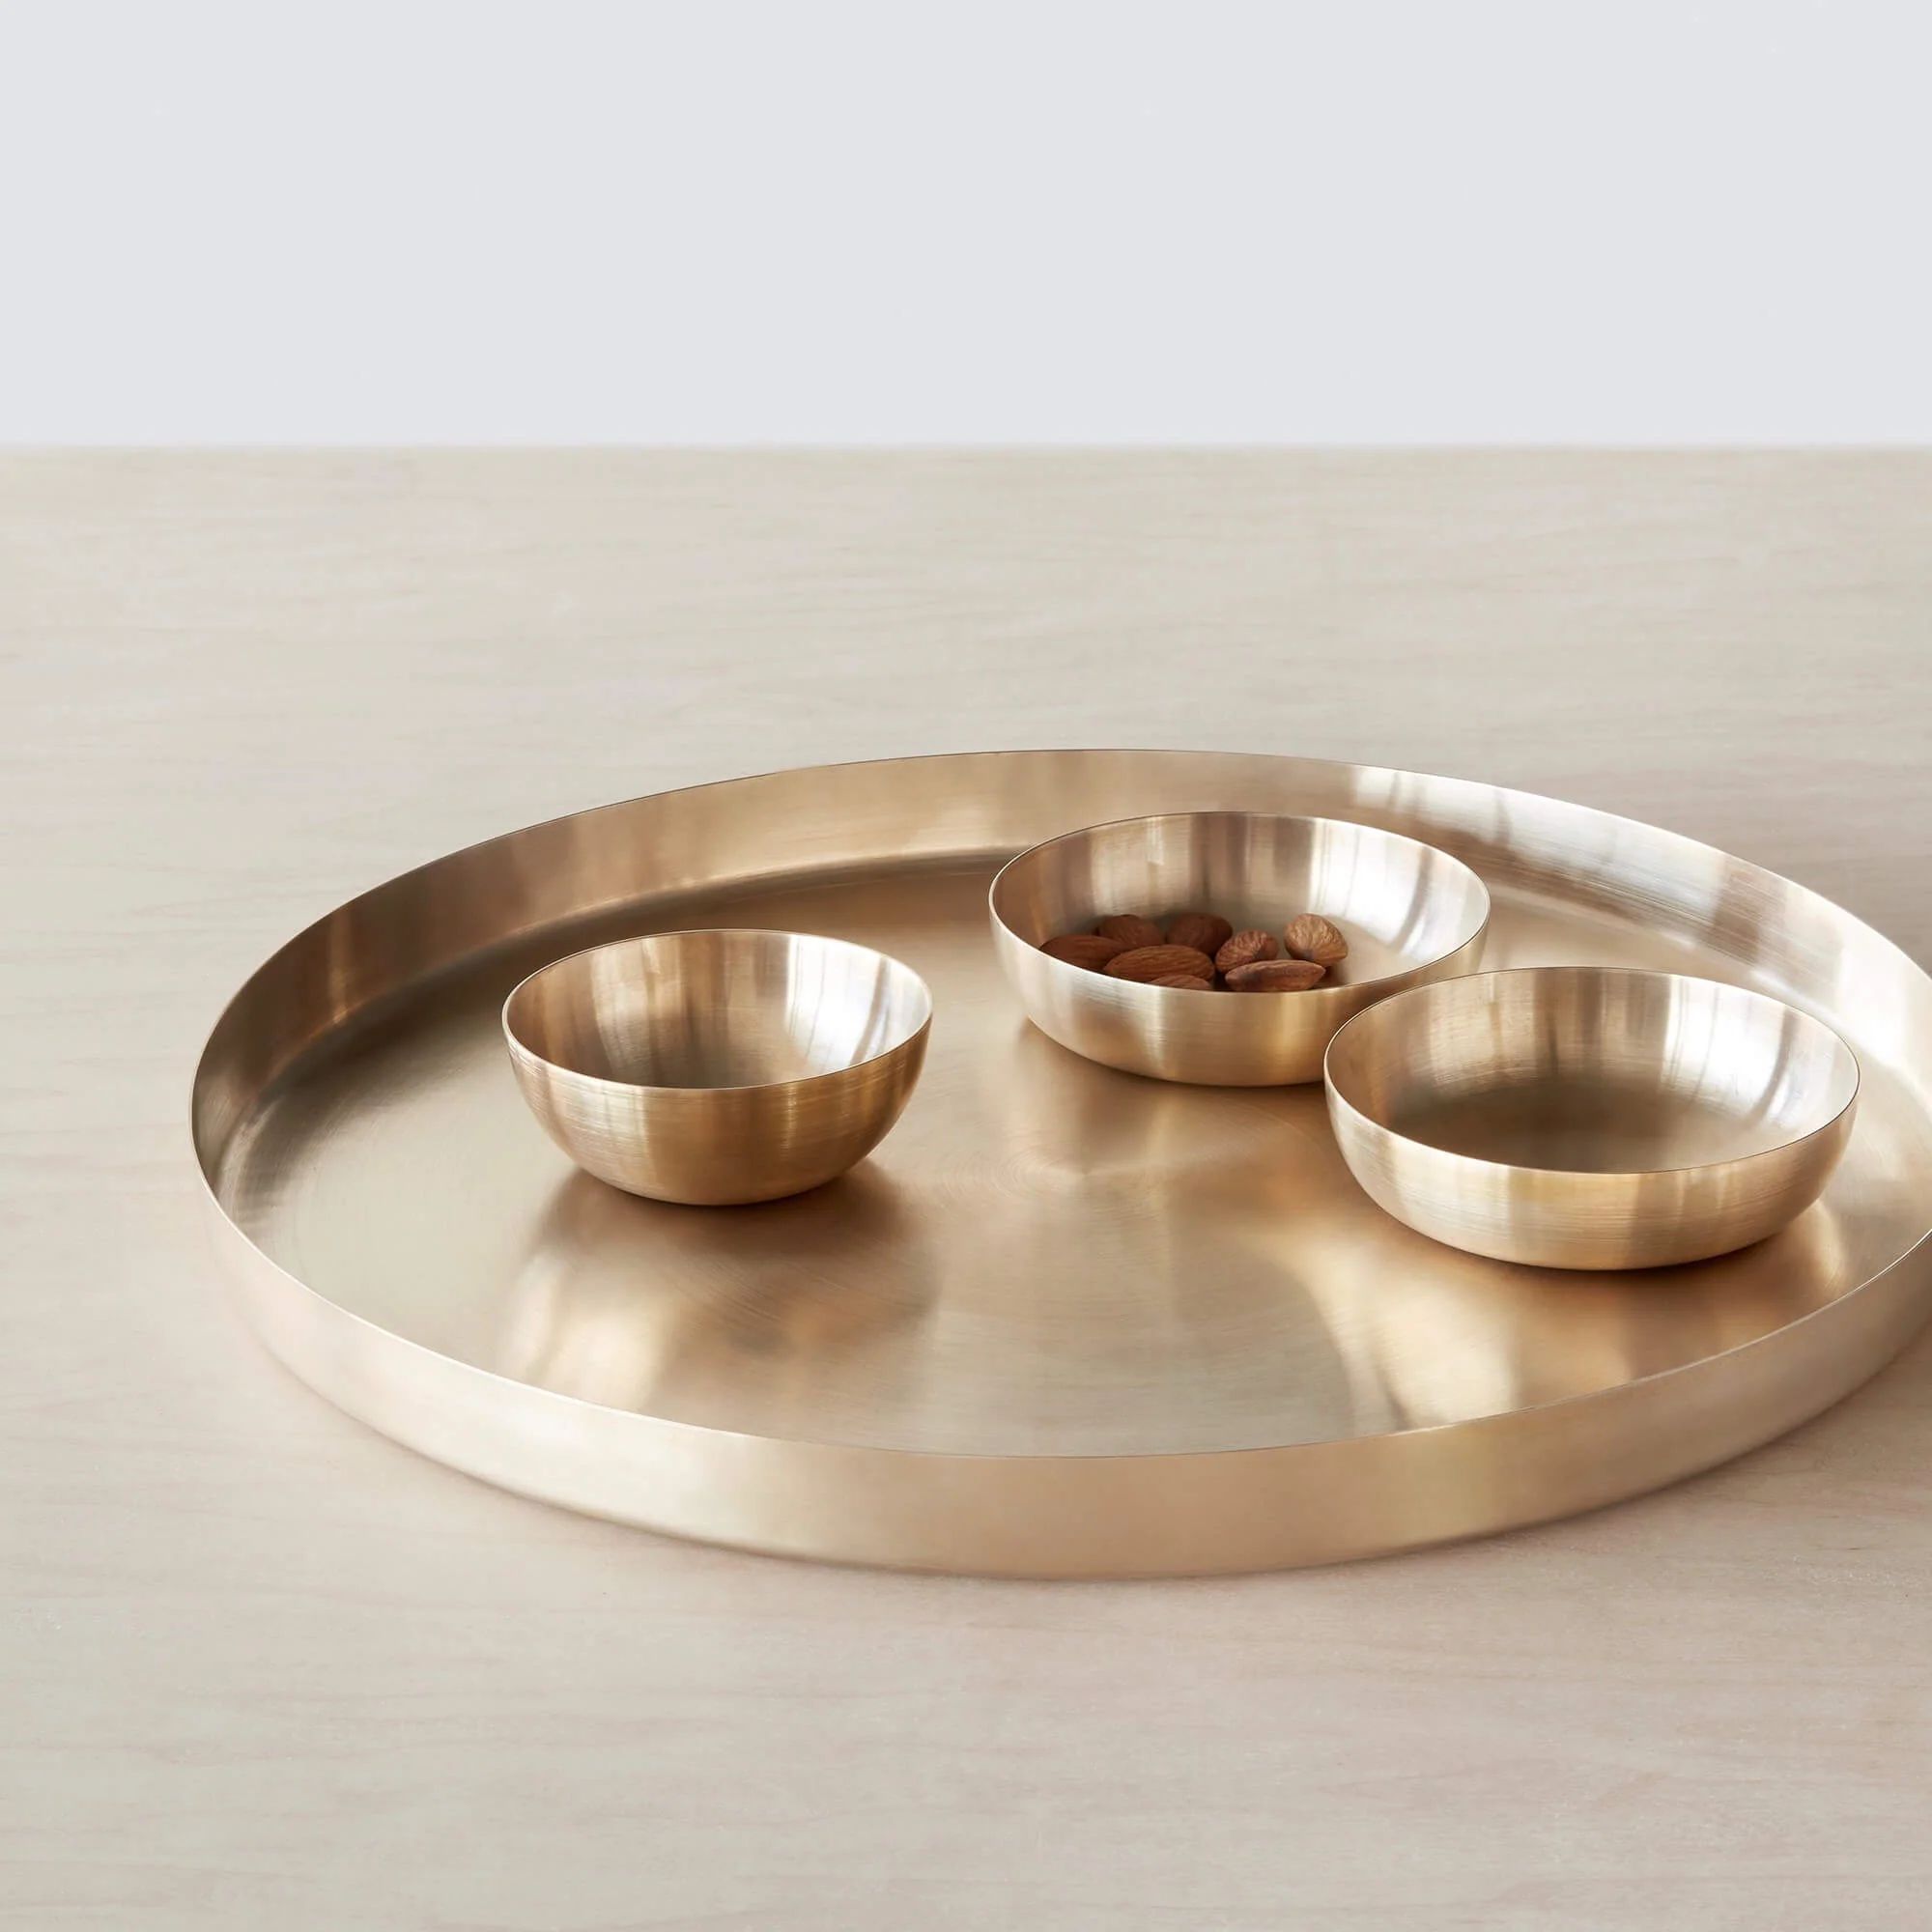 Dasar Bronze Serving Set - Set of 4 | The Citizenry